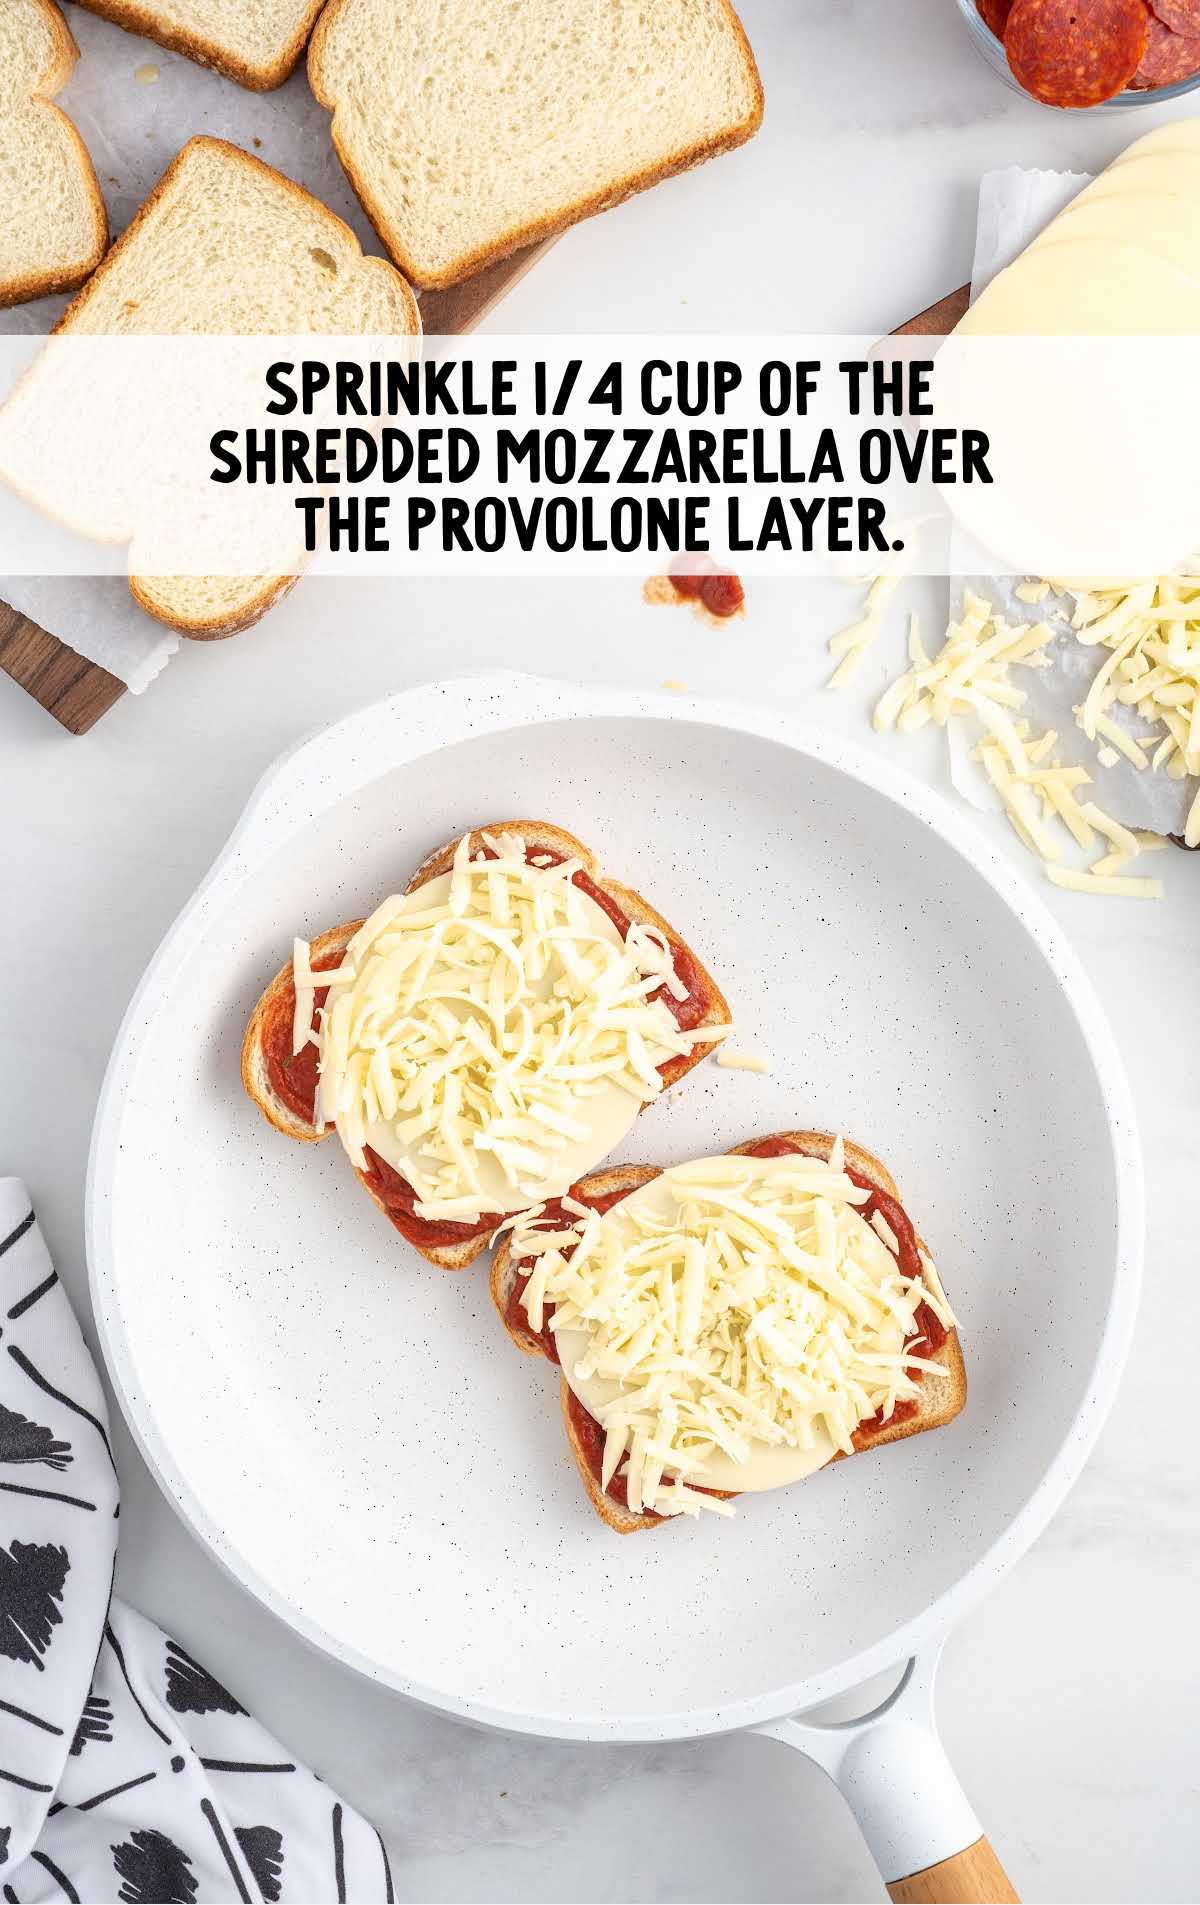 shredded mozzarella cheese placed on top of the provolone